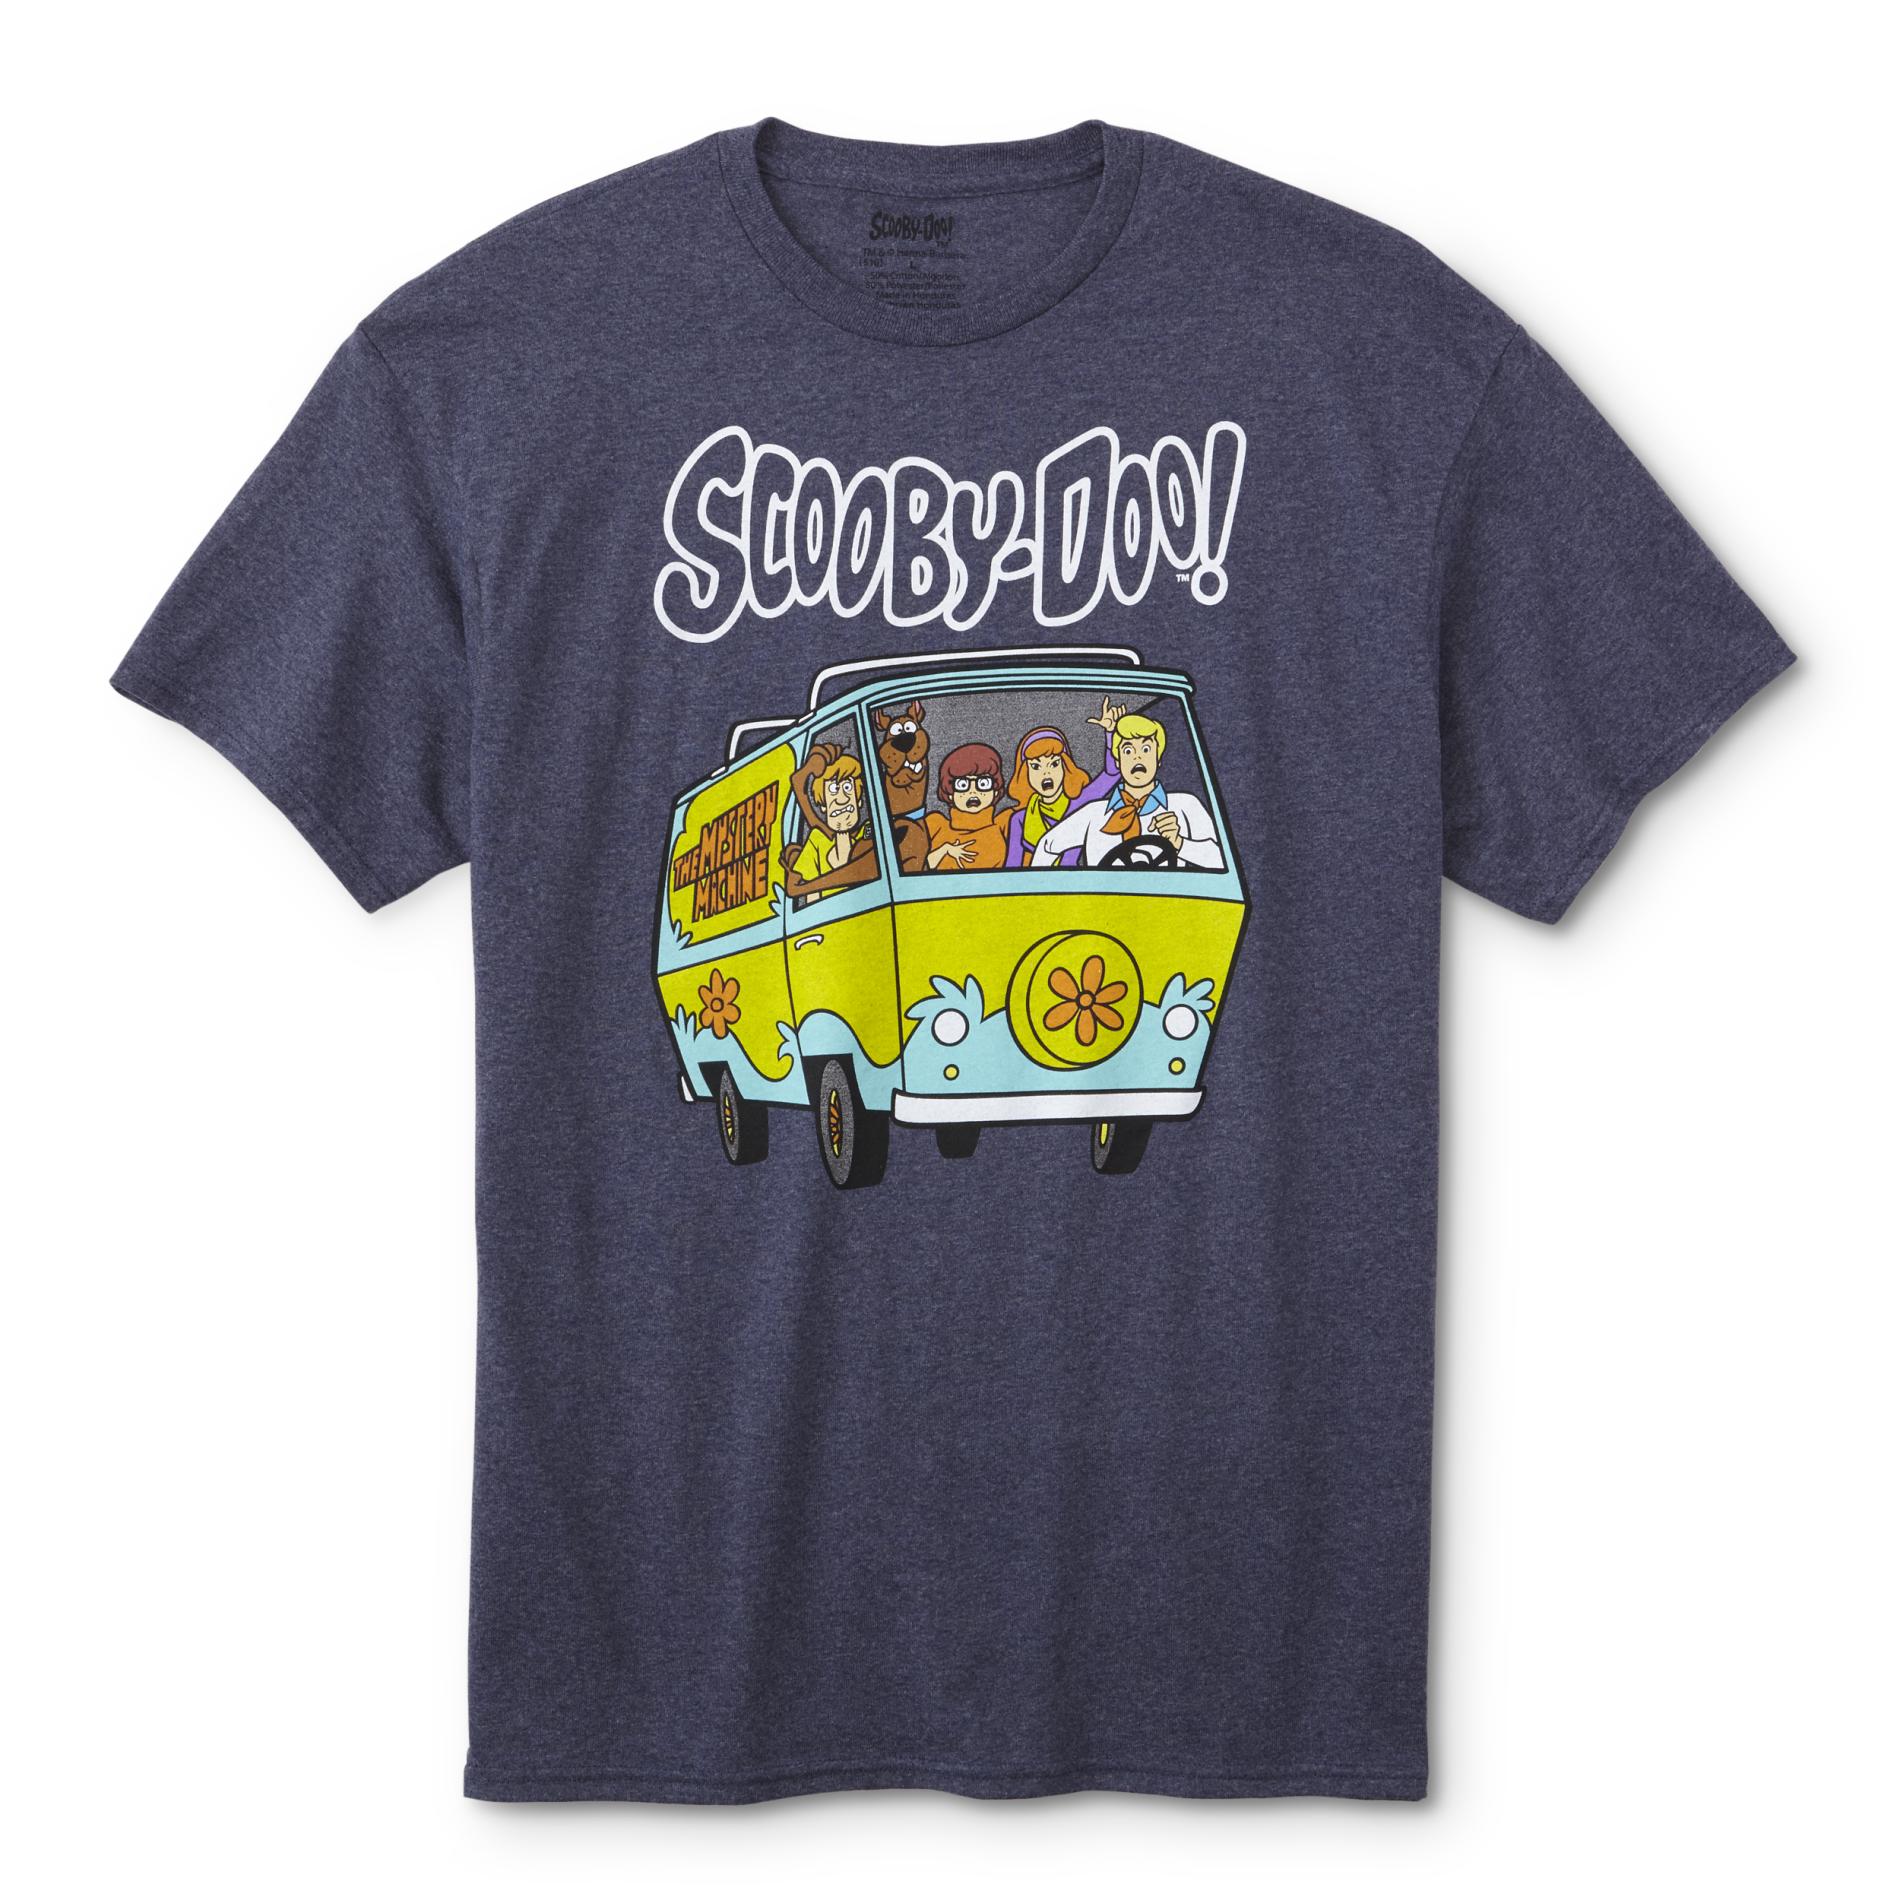 Scooby-Doo Young Men's Graphic T-Shirt